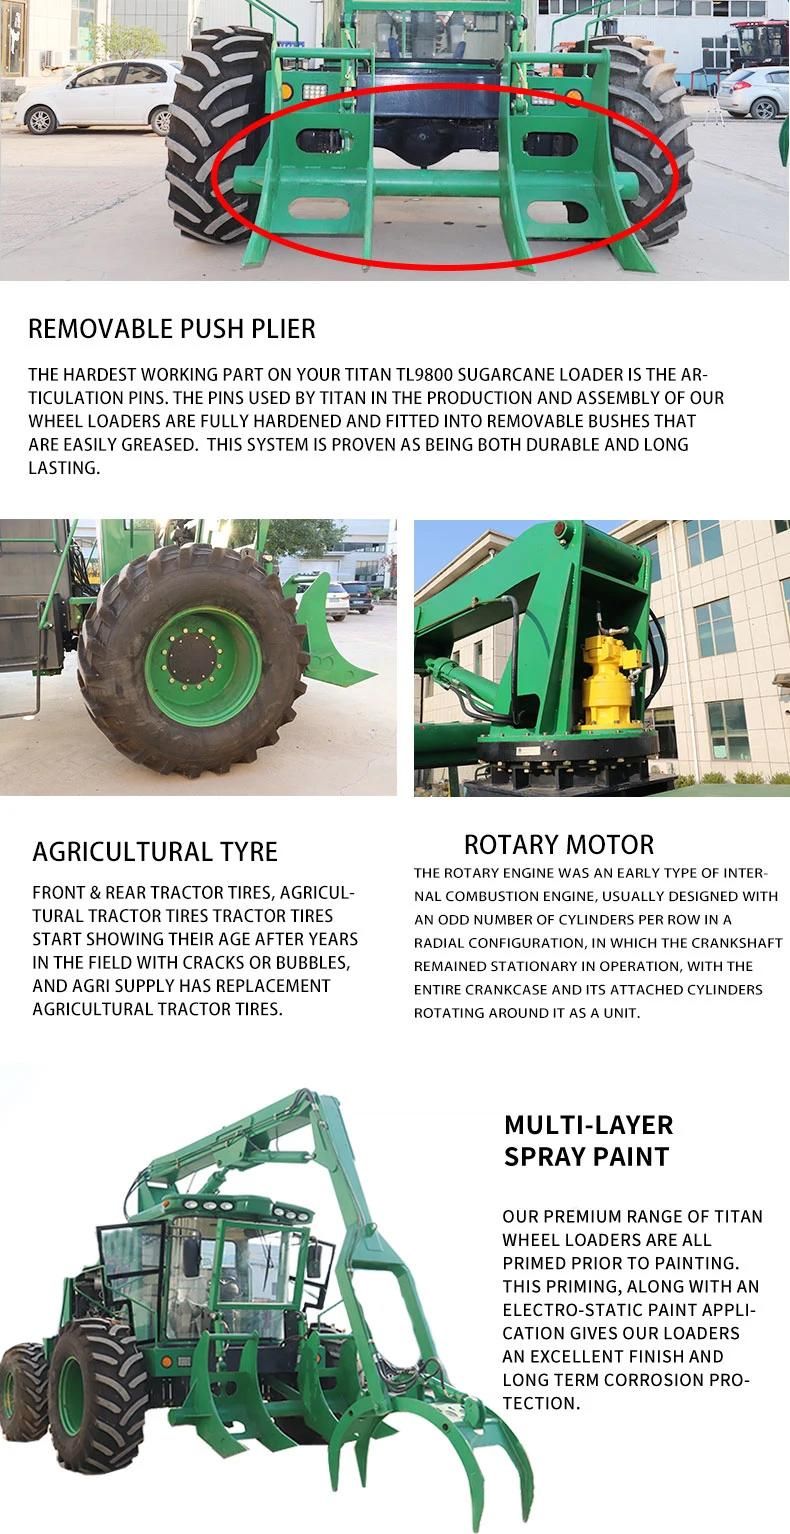 OEM Manufacture Cummins Engine Agricultural Loader Sugarcane with CE ISO SGS Certificate Approved